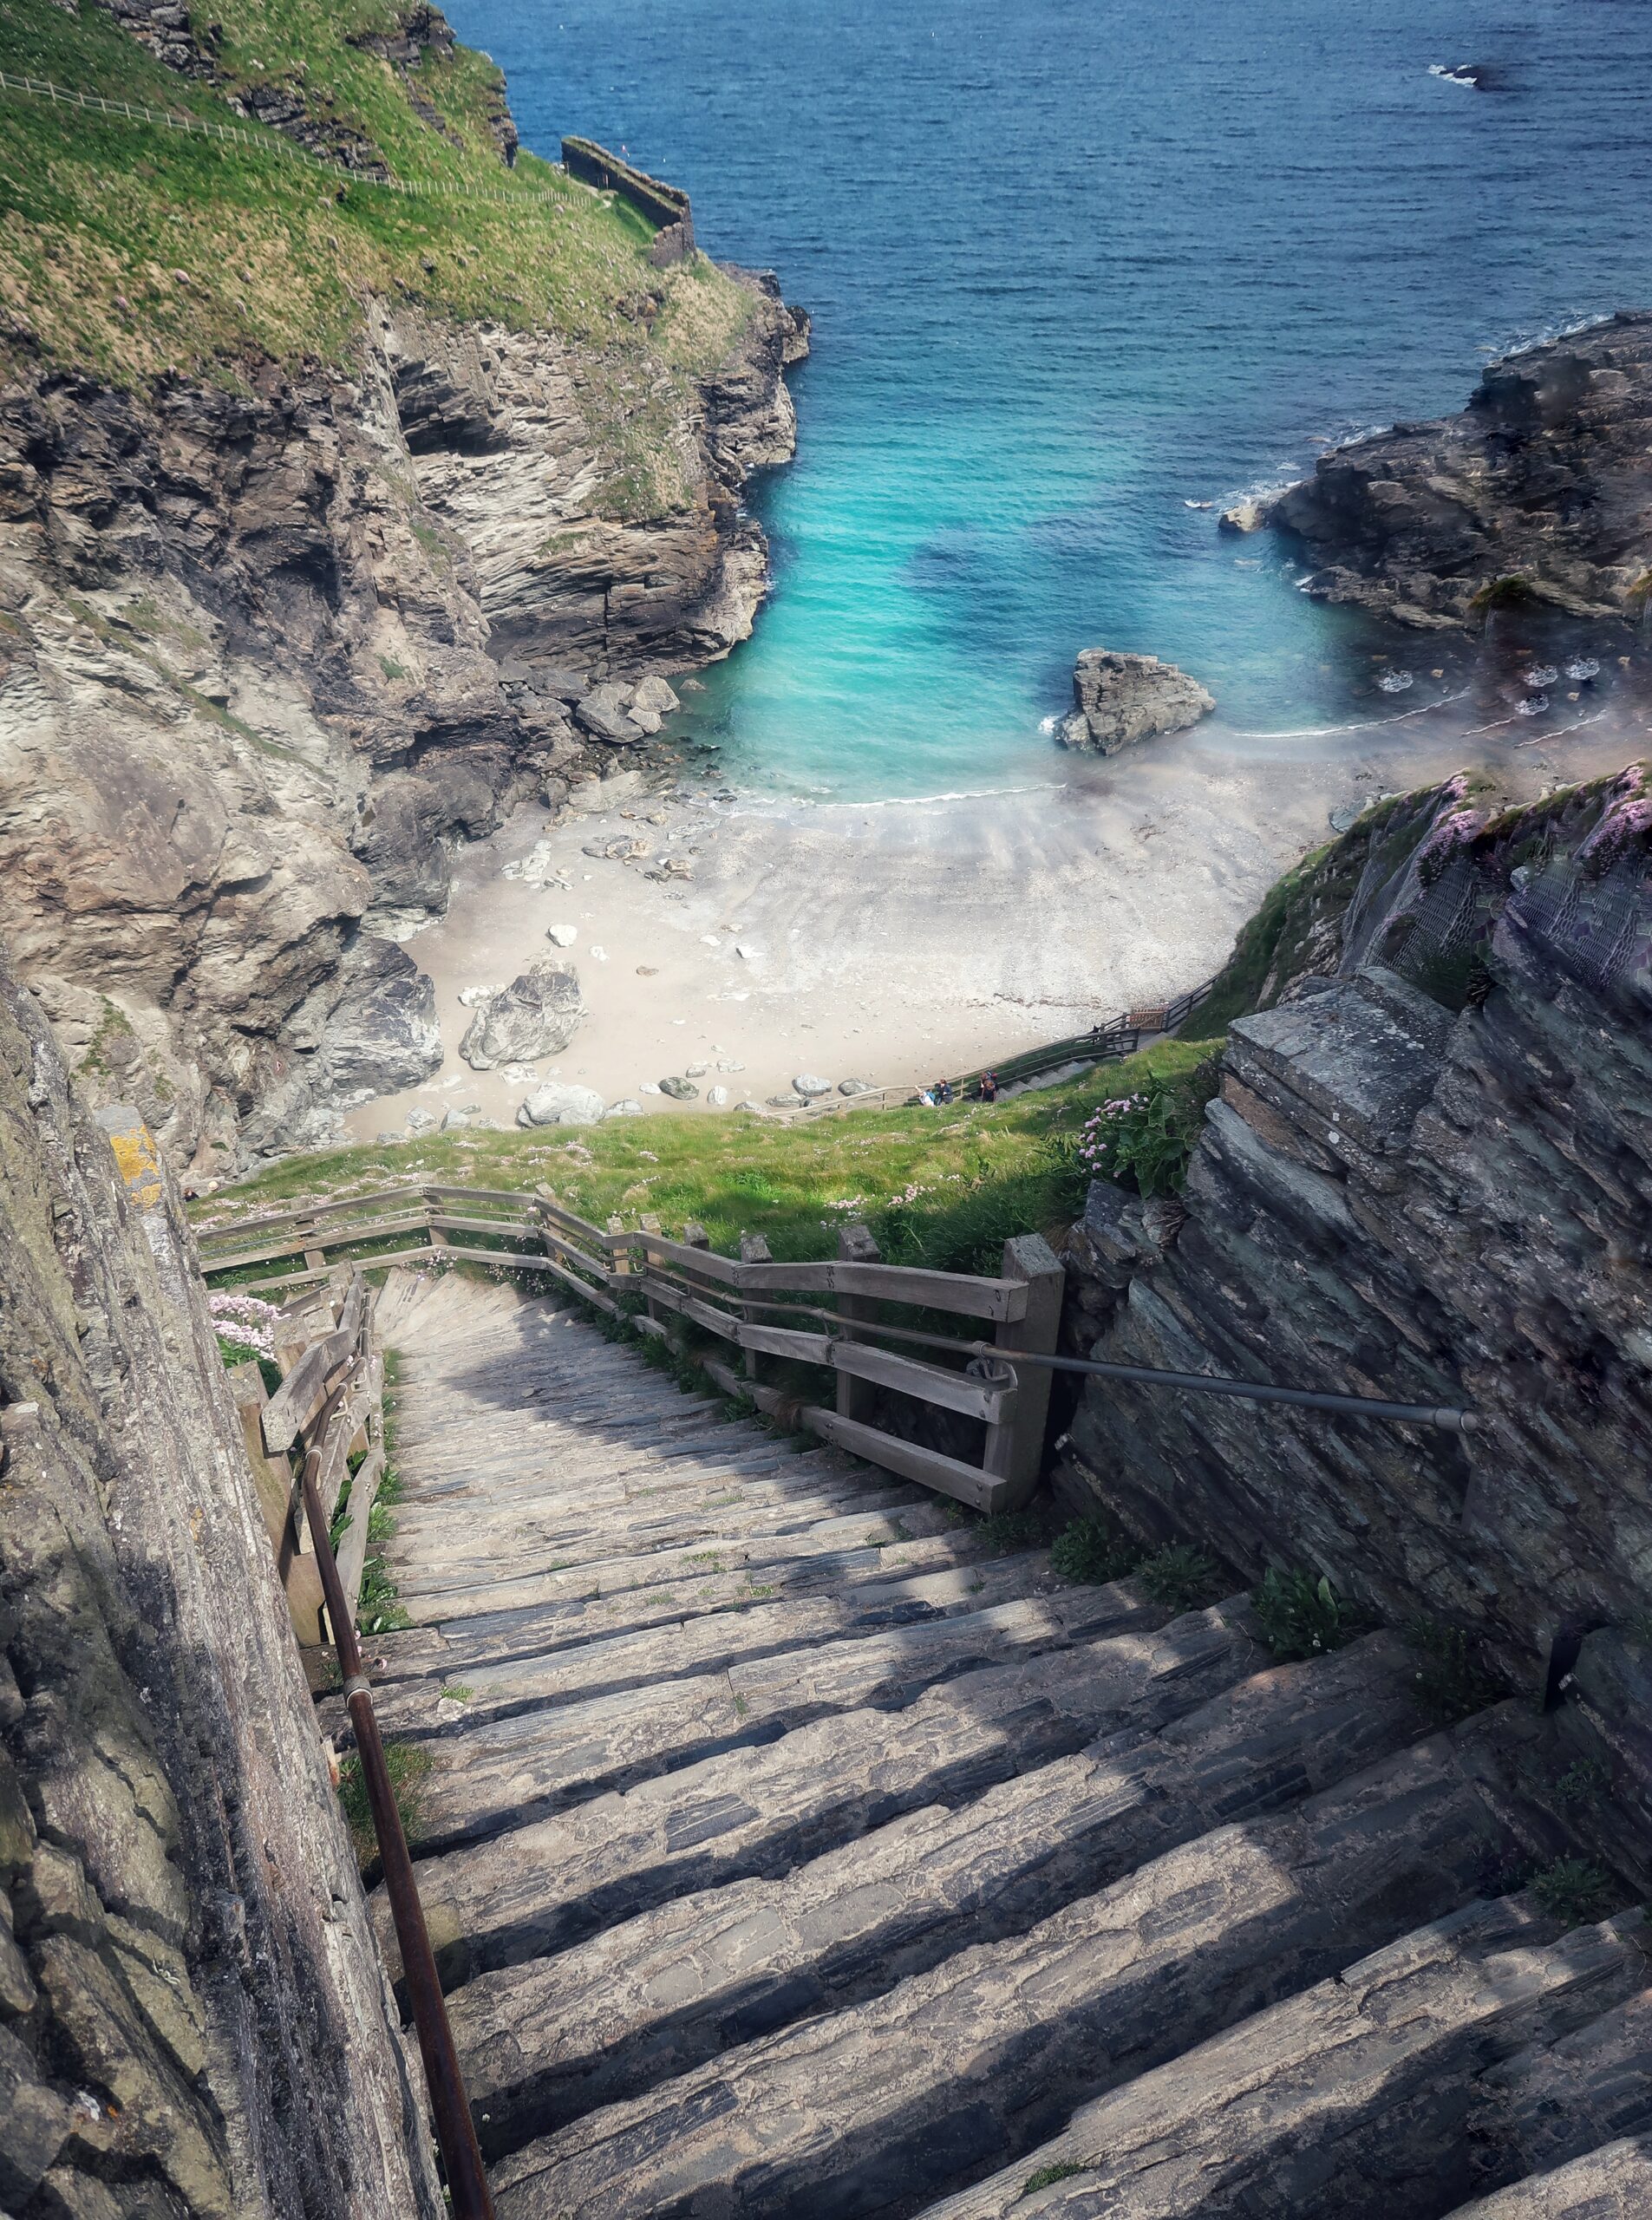 Tintagel Castle and the stairs leading to the beach are one of the most unique hidden gems in the UK